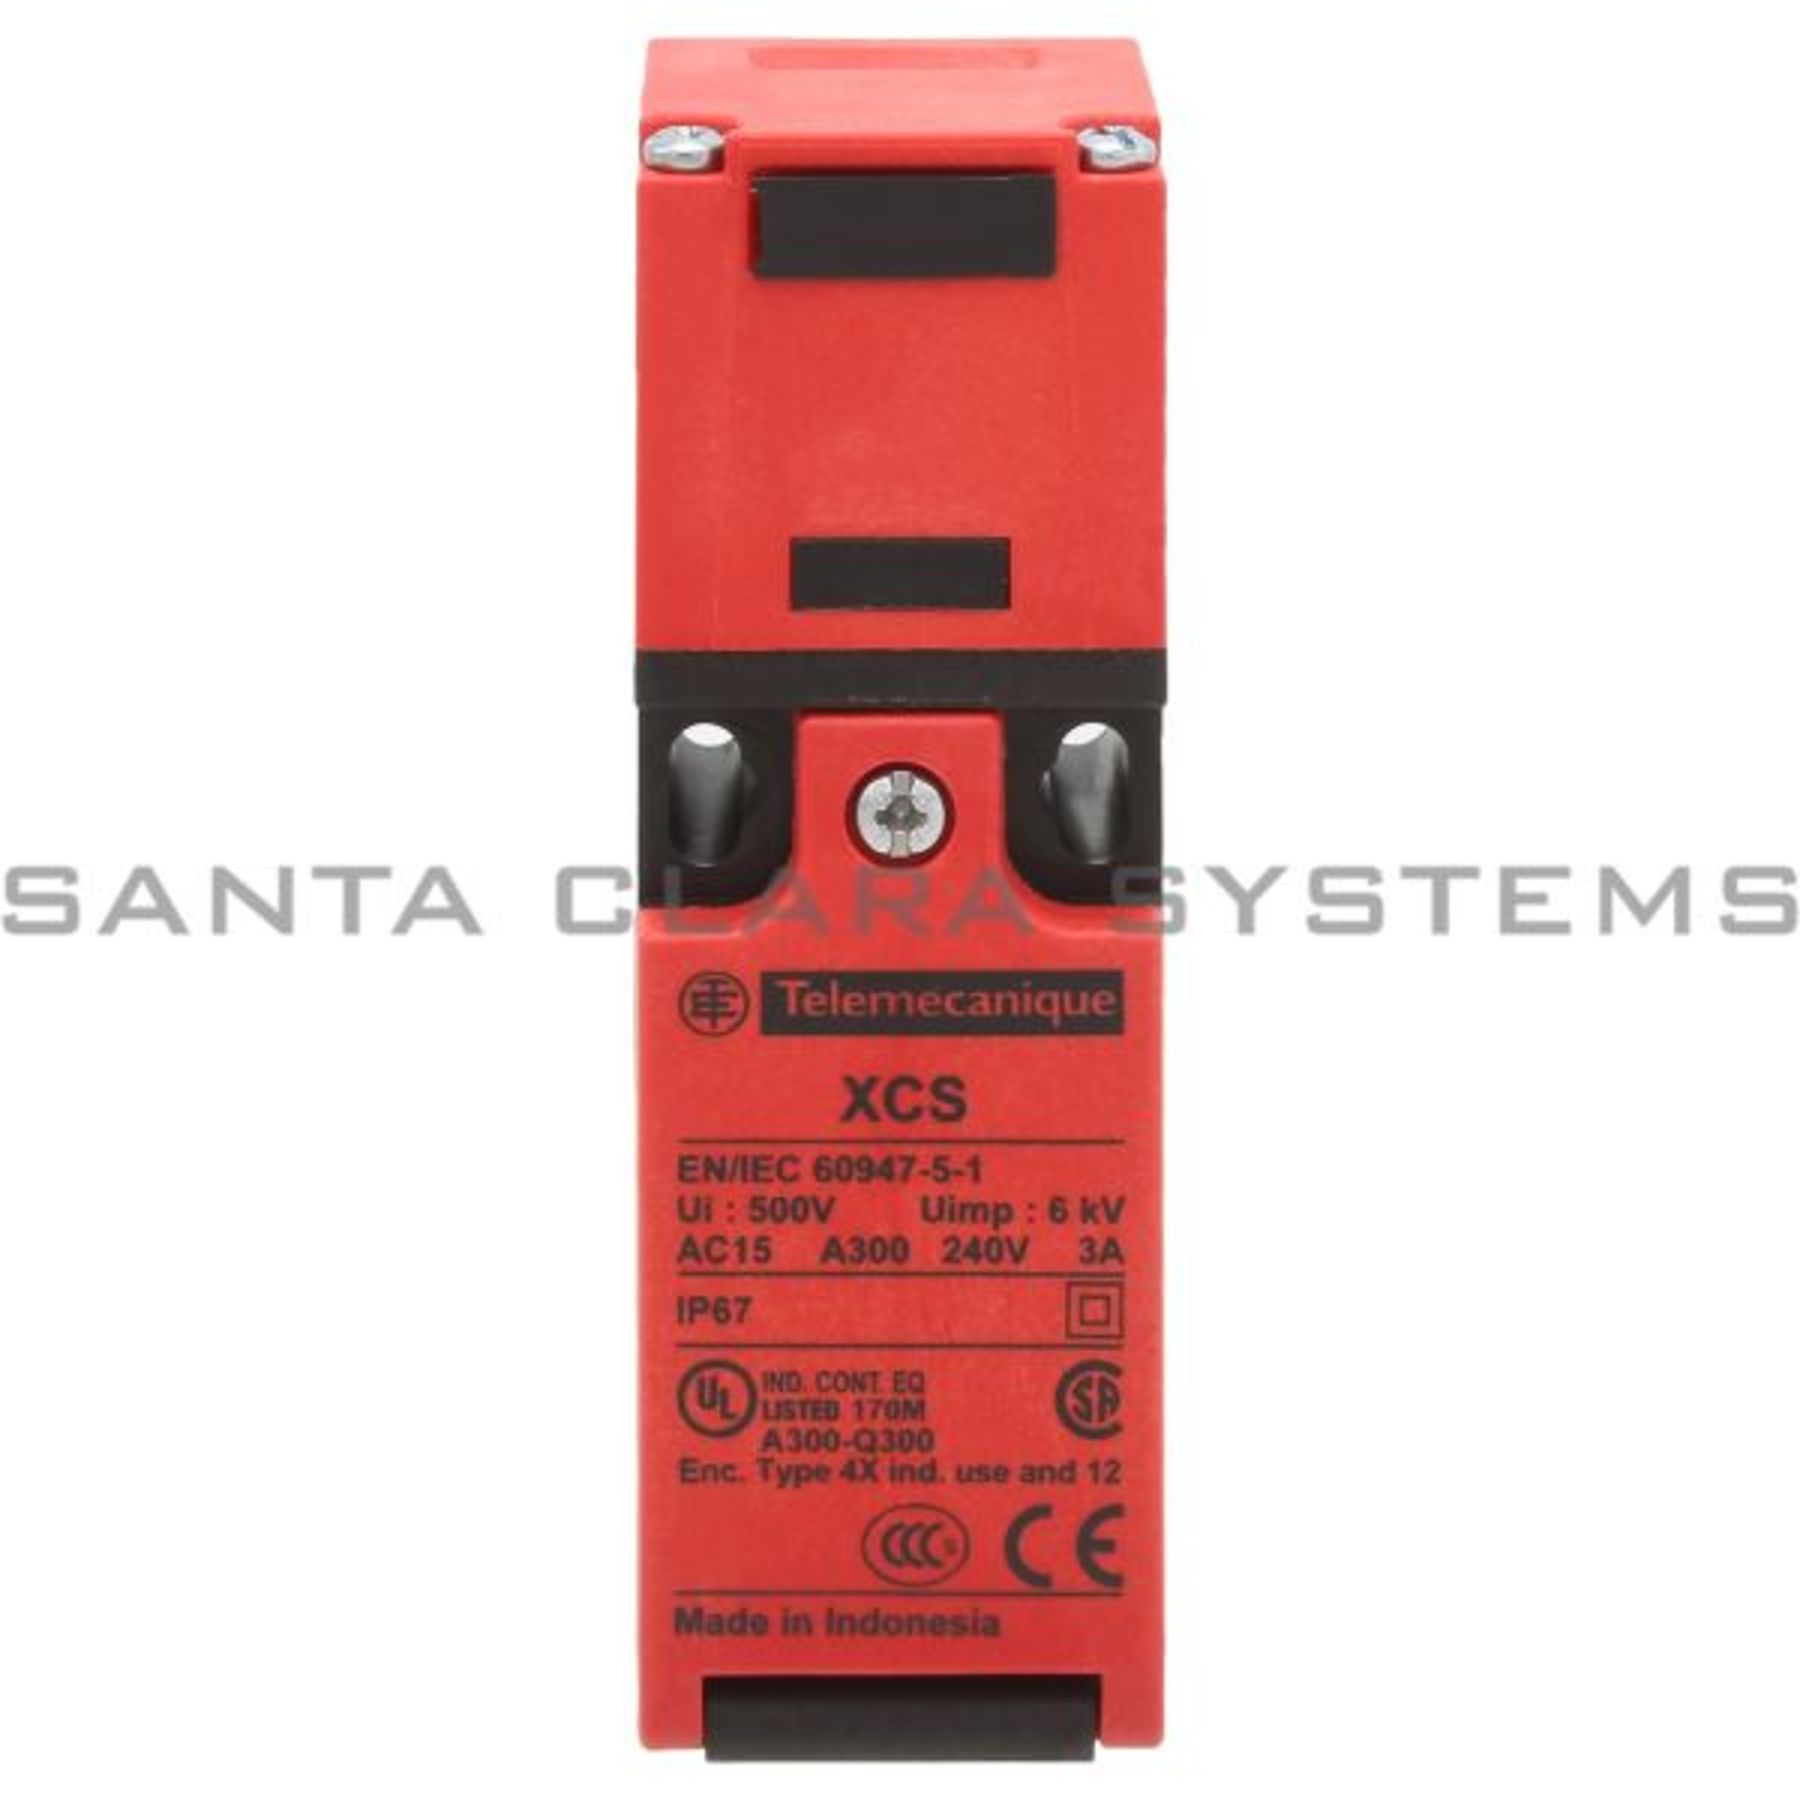 Telemecanique Plastic Safety Switch Xcspa 1 Nc 1 No Snap Action 1 Entry Tapped Pg 11 Xcspa591 En Stock Navires Aujourd Hui Santa Clara Systems